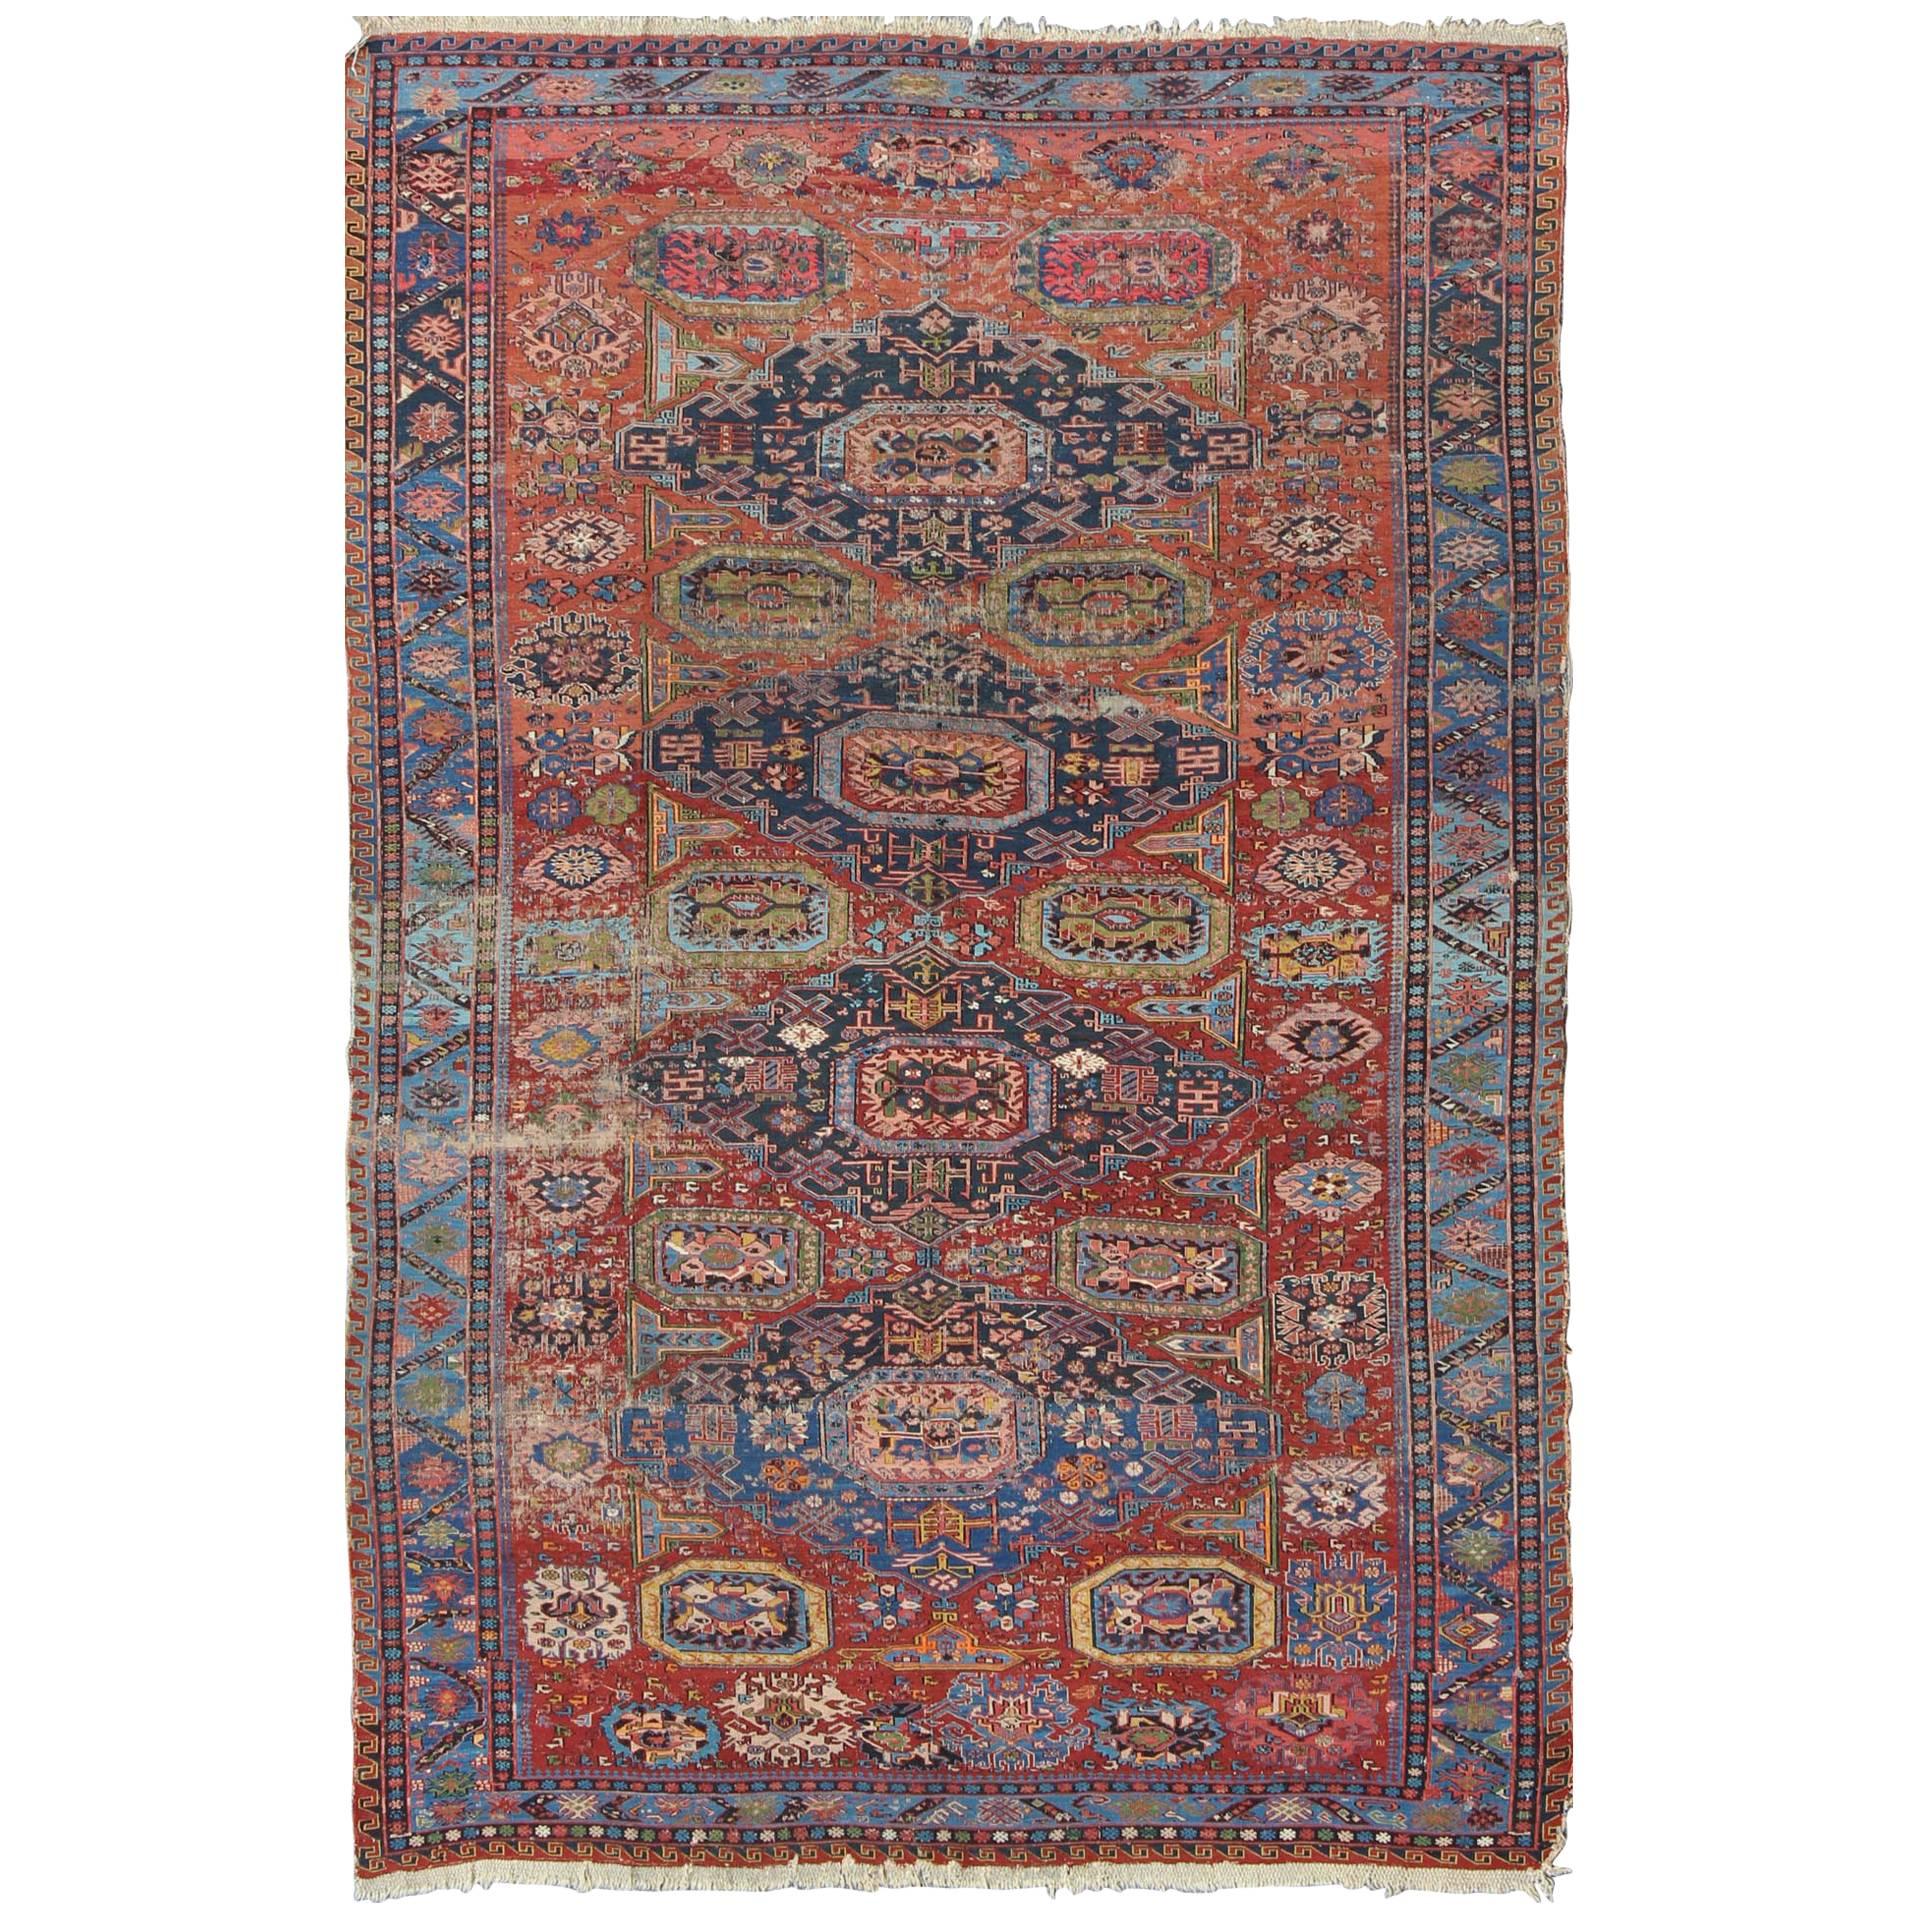 Antique Caucasian 19th Century Sumac Rug in Varying Colors of Red, Green & Blue